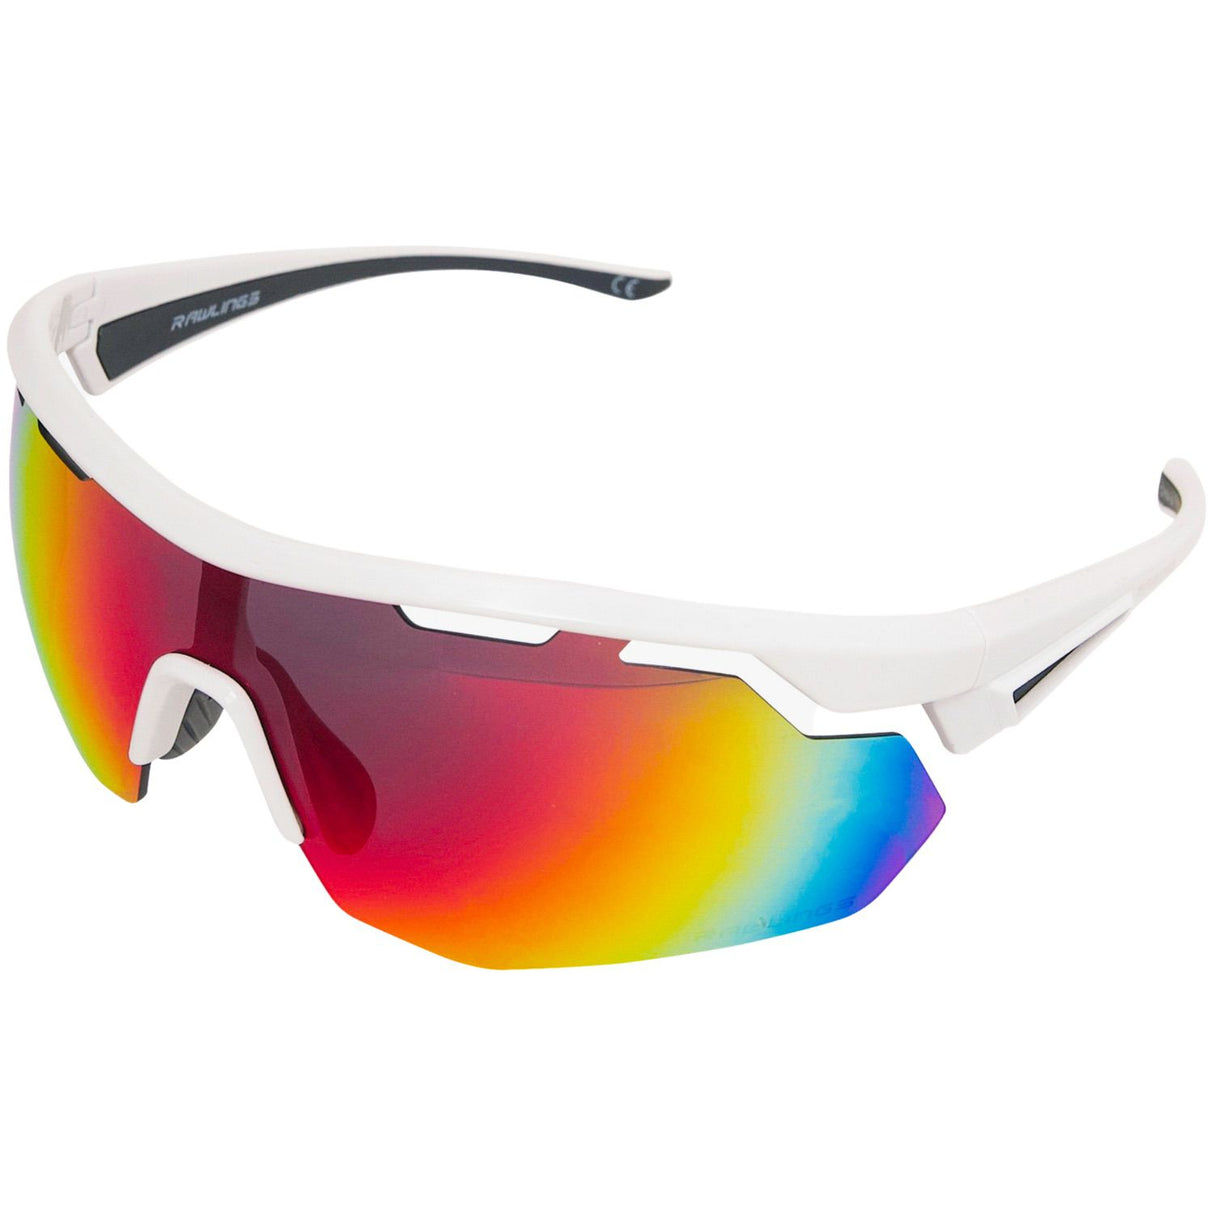 evidence sunglasses products for sale